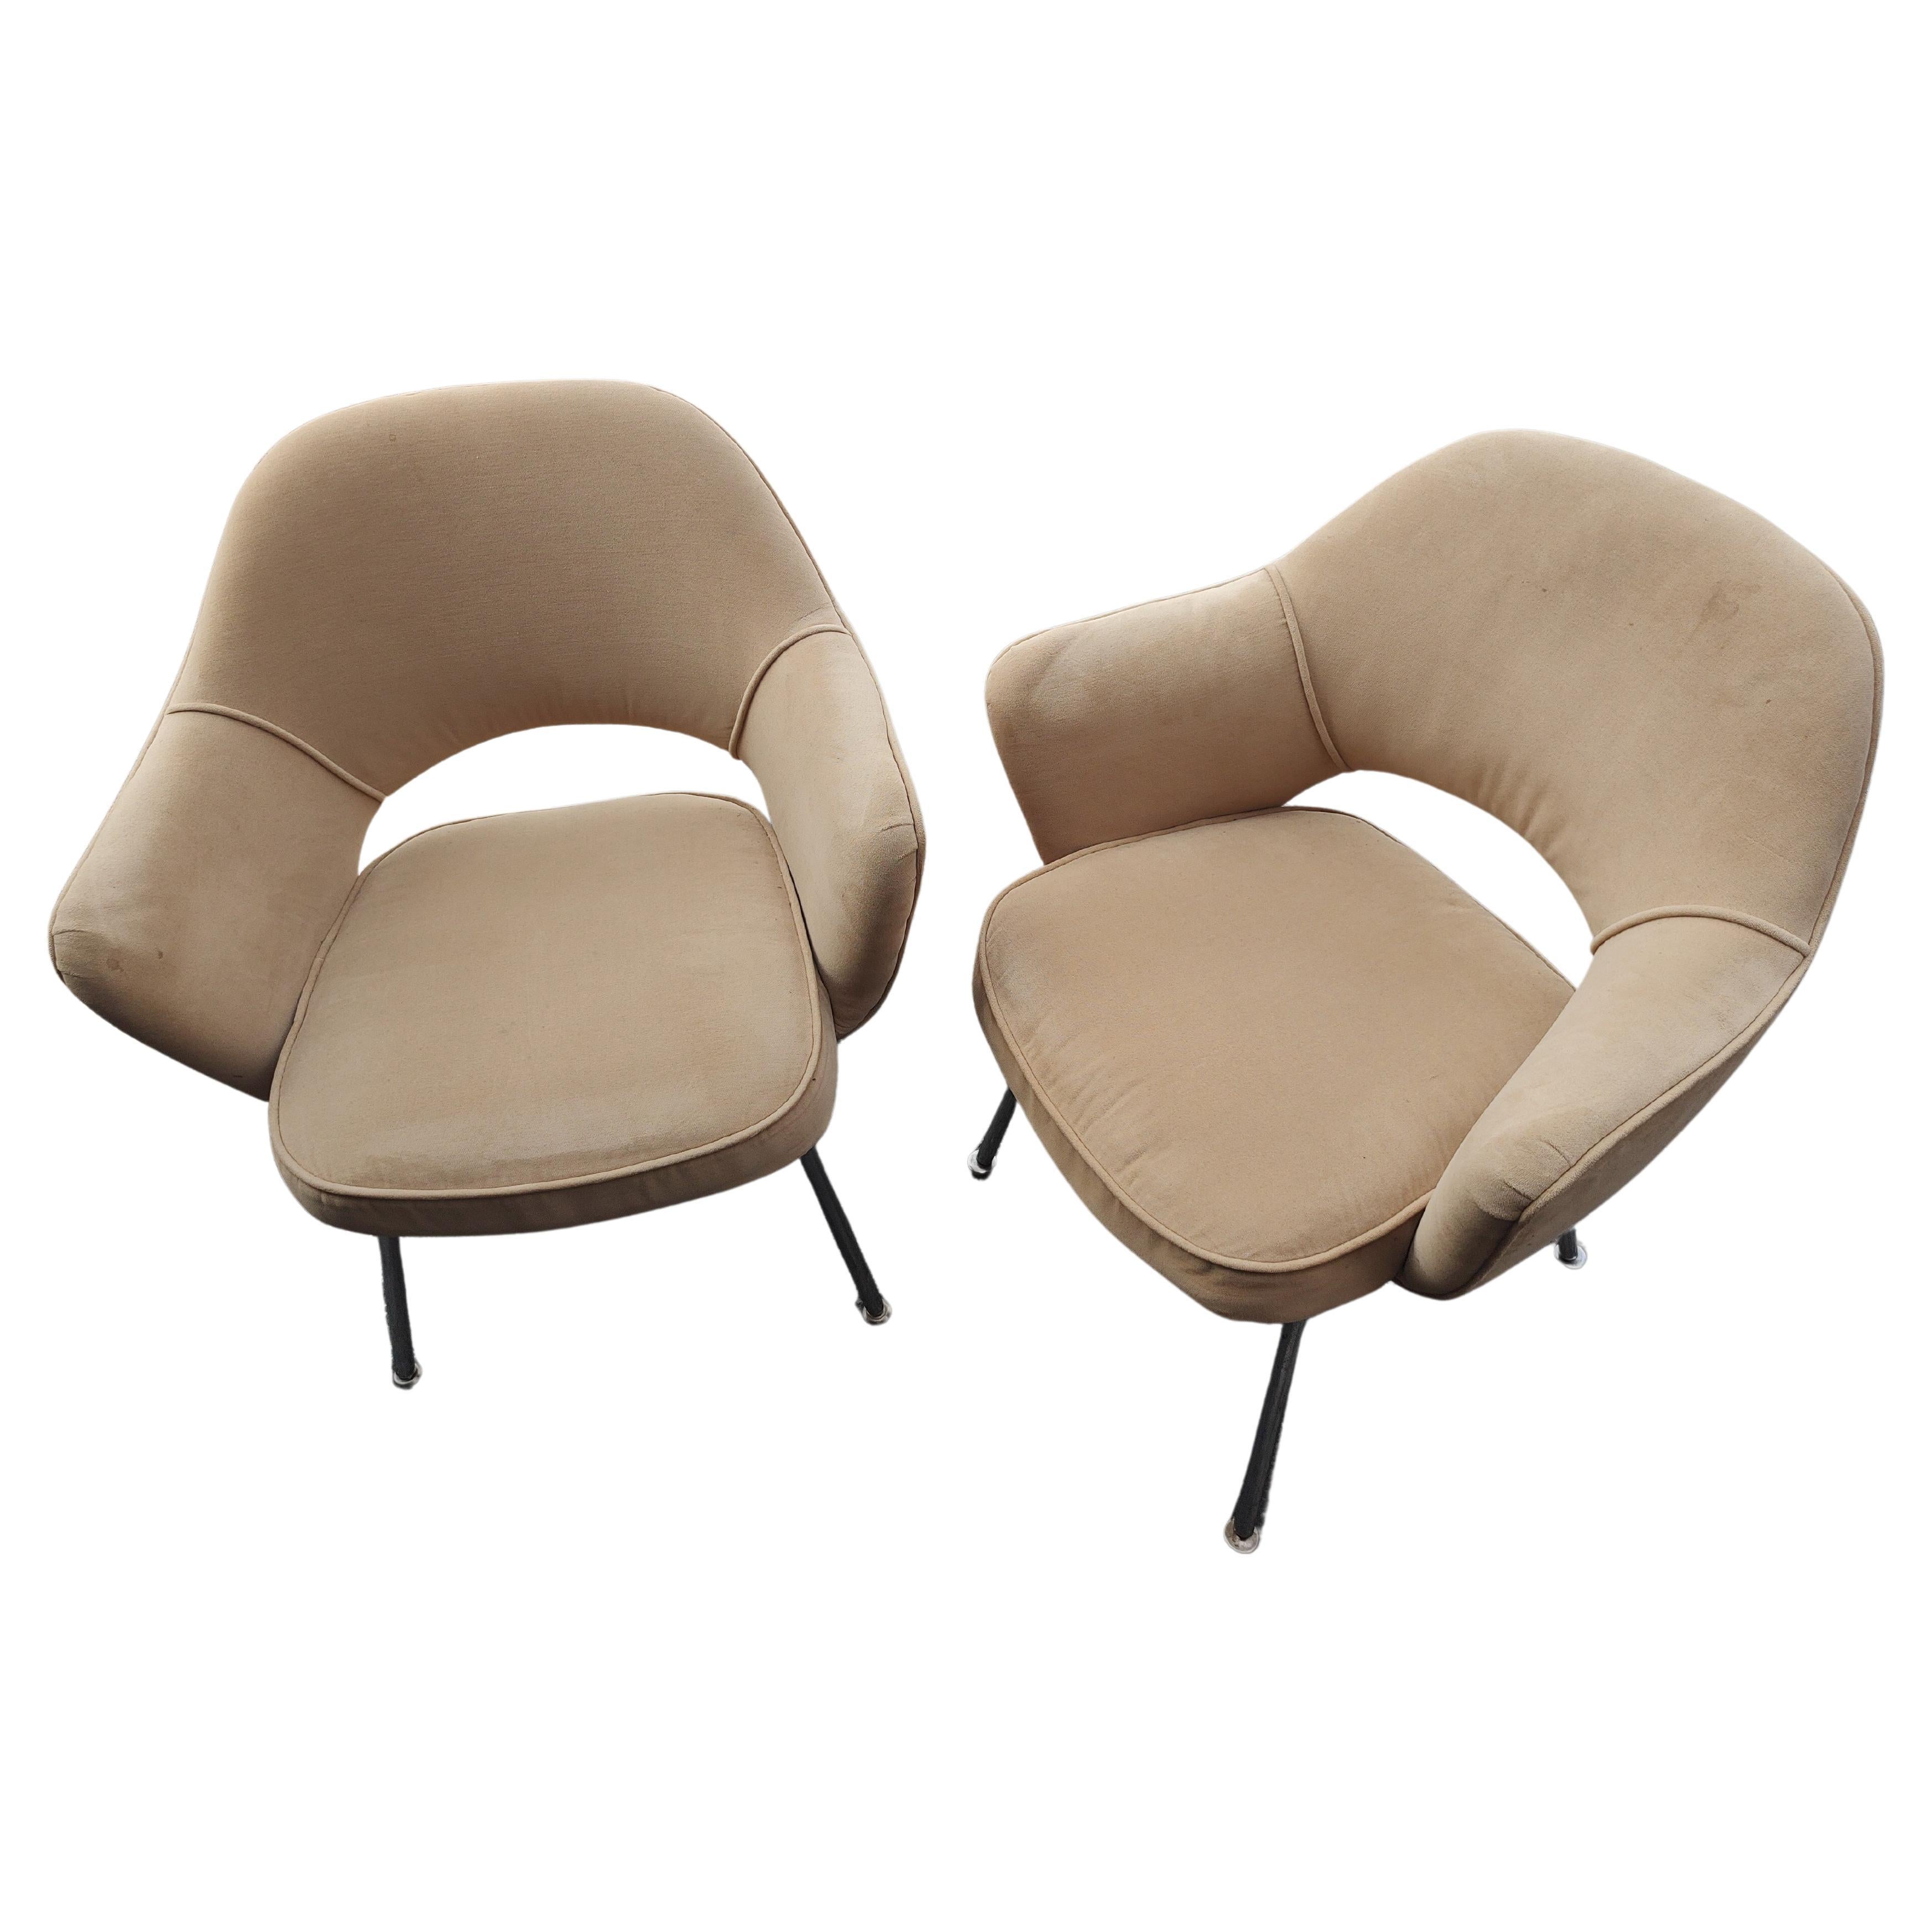 American Pair of Mid-Century Modern Executive Armchairs by Eero Saarinen for Knoll, C1965 For Sale